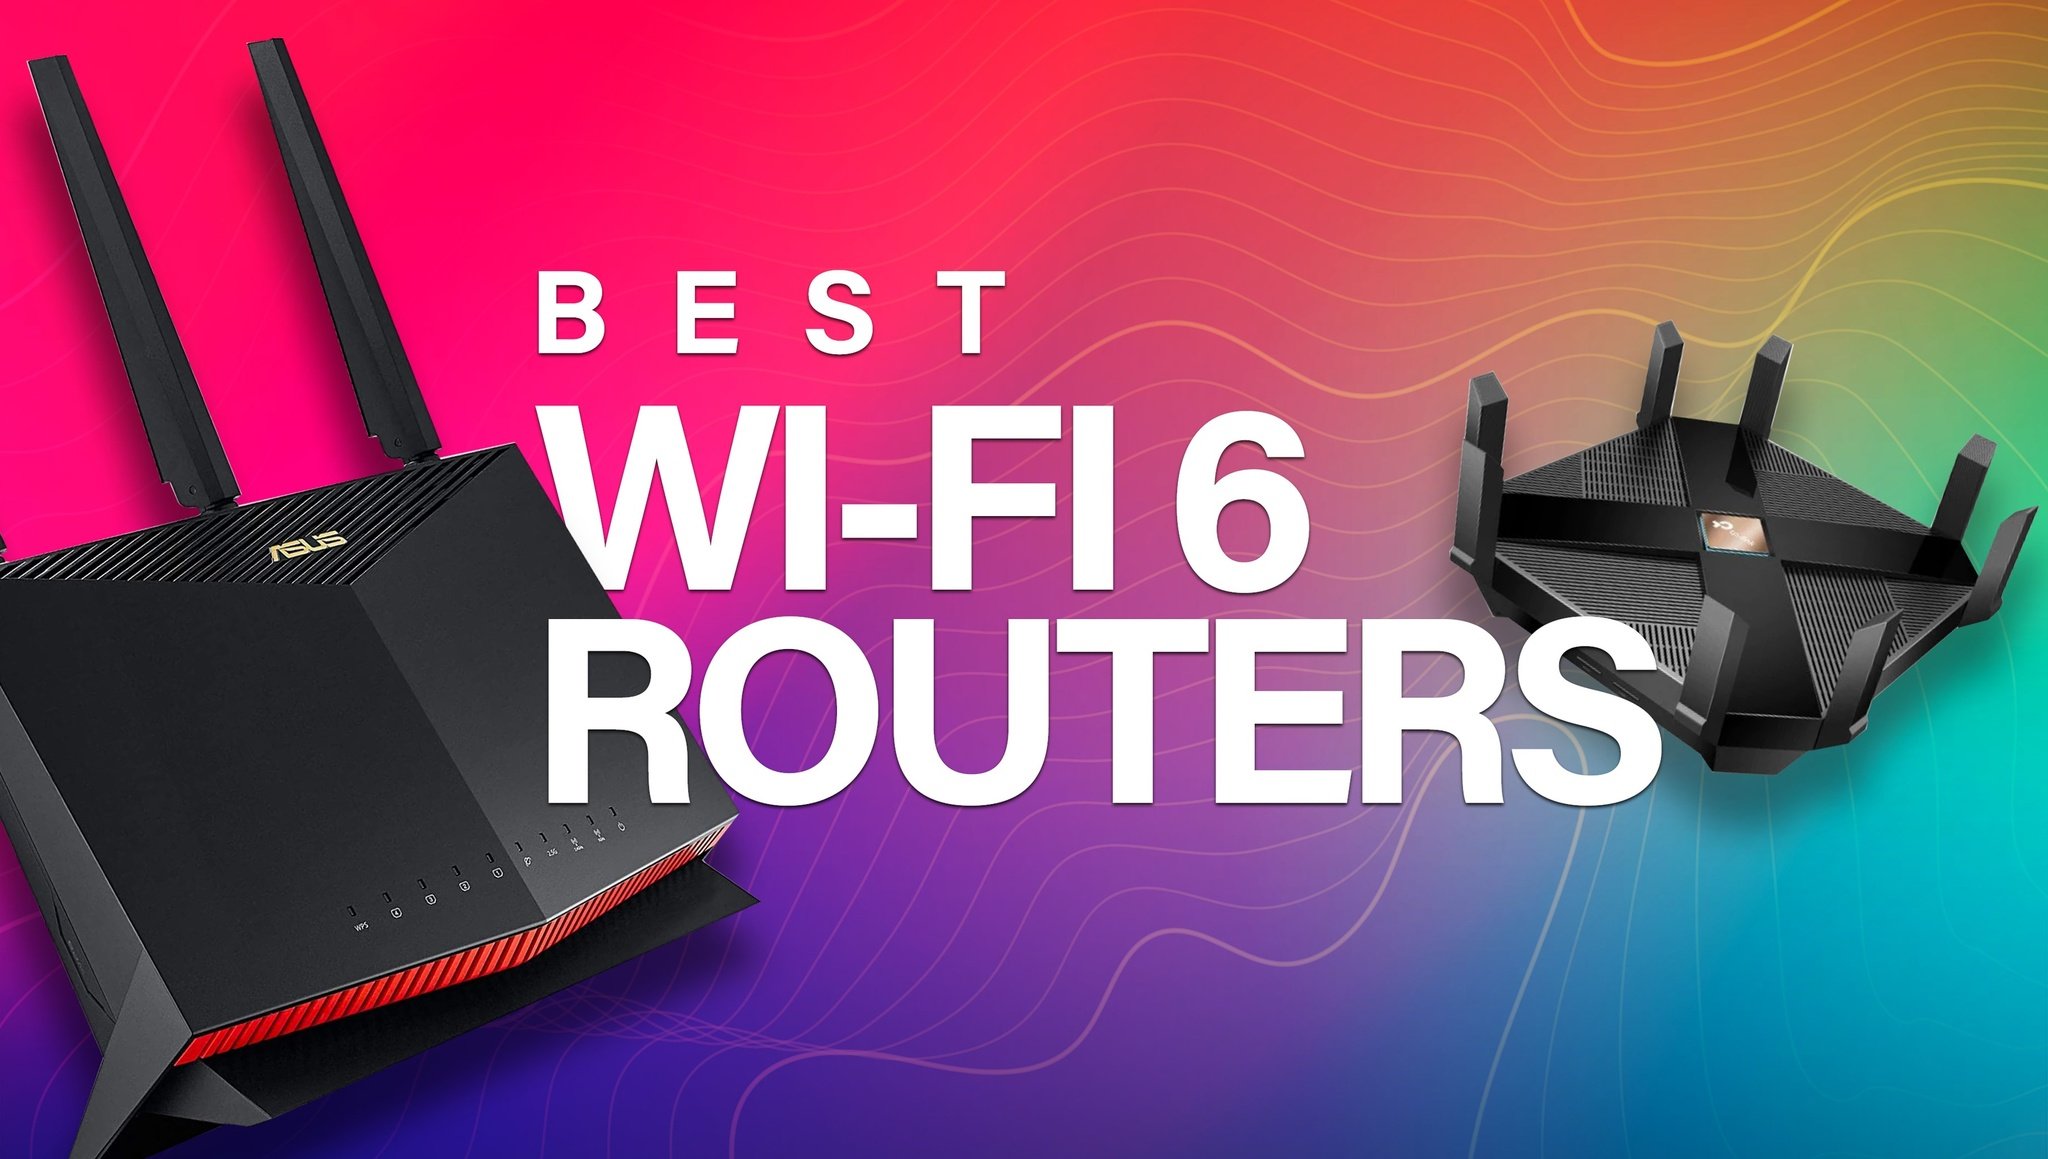  Wi-Fi 6 routers